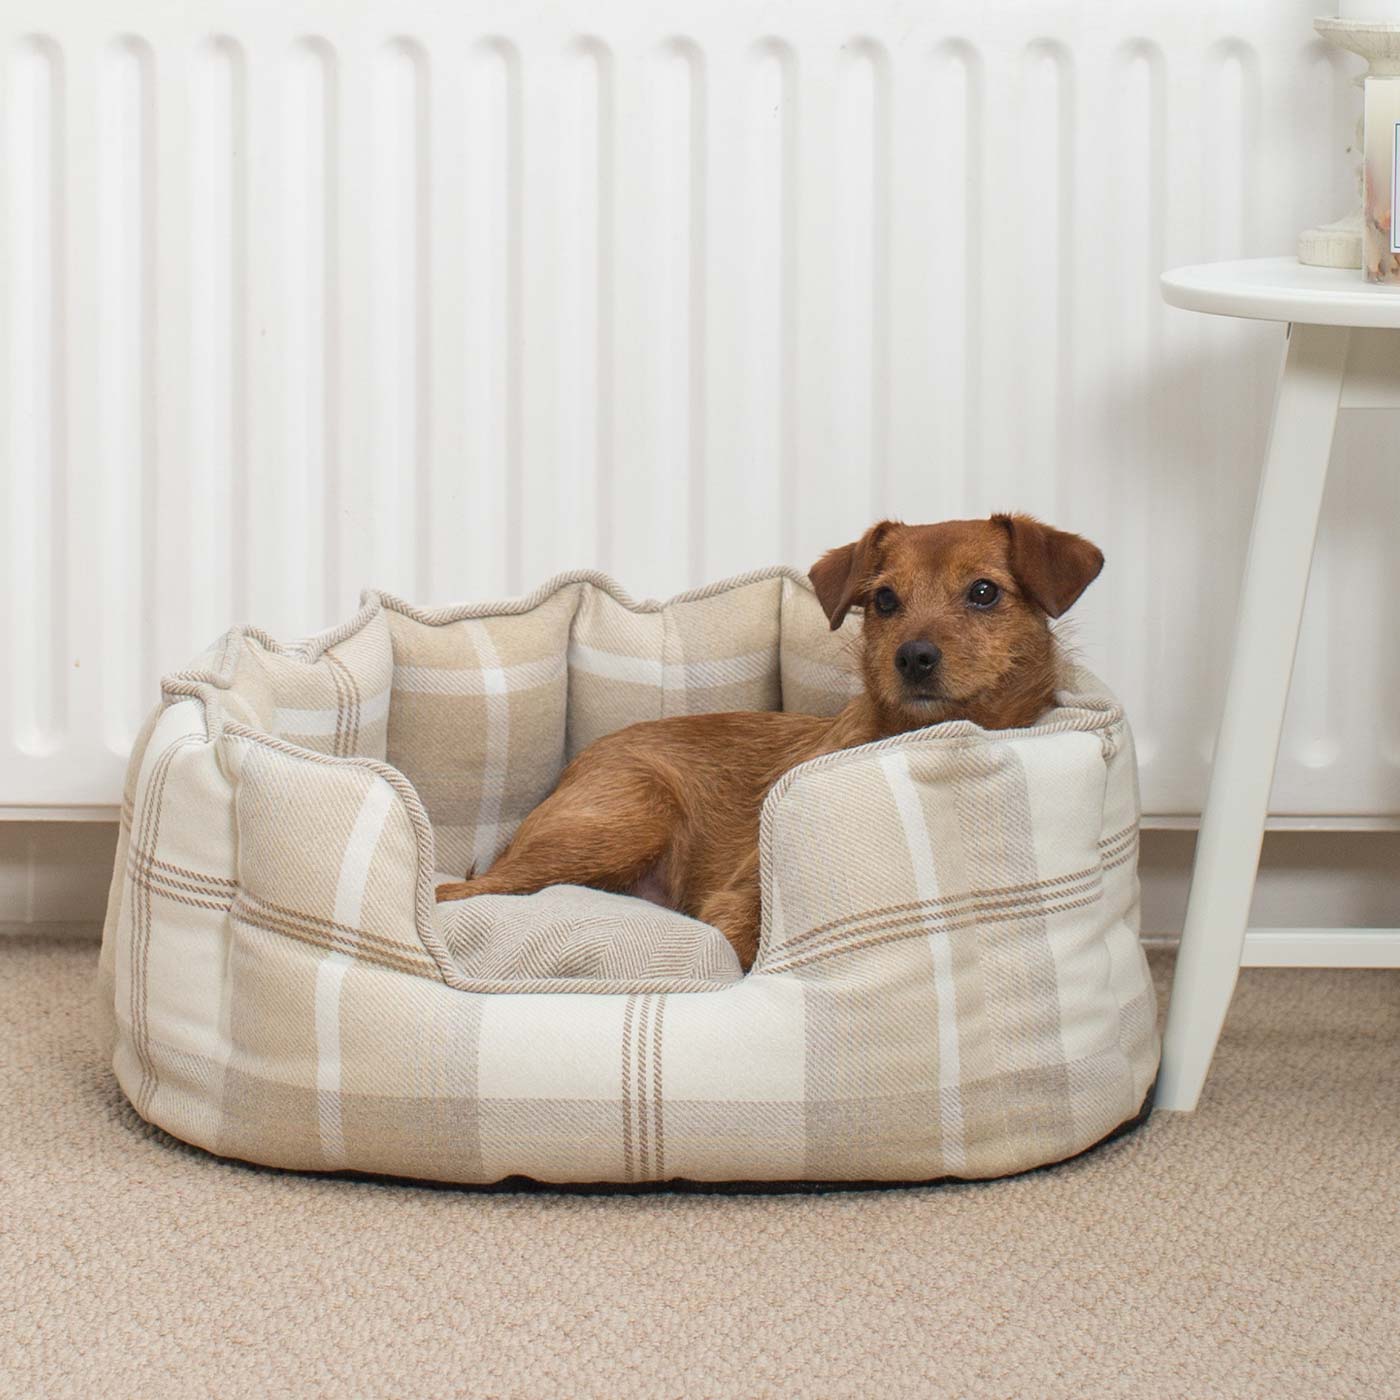 Discover Our Luxurious High Wall Bed For Dogs, Featuring inner pillow with plush teddy fleece on one side To Craft The Perfect Dogs Bed In Stunning Natural Tweed! Available To Personalize Now at Lords & Labradors US